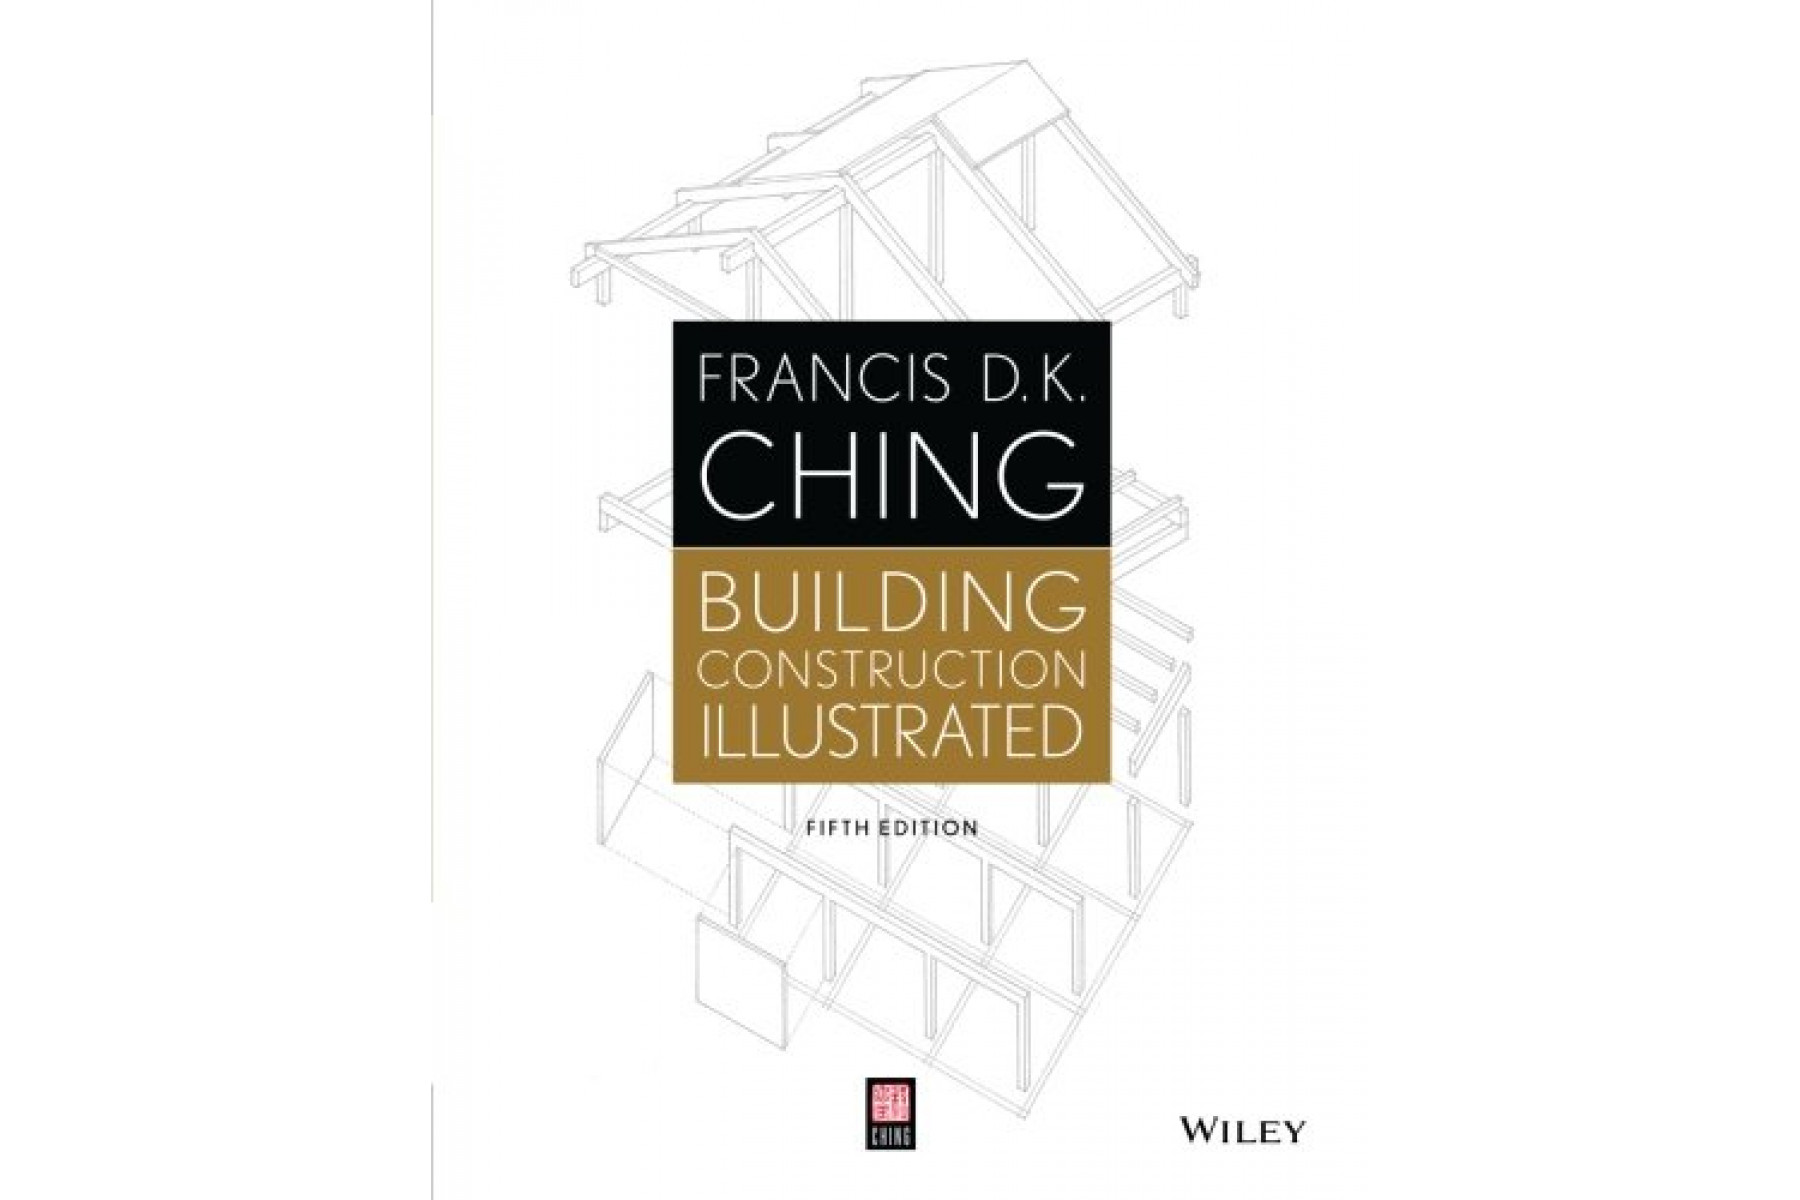 building construction illustrated 5th edition pdf free download